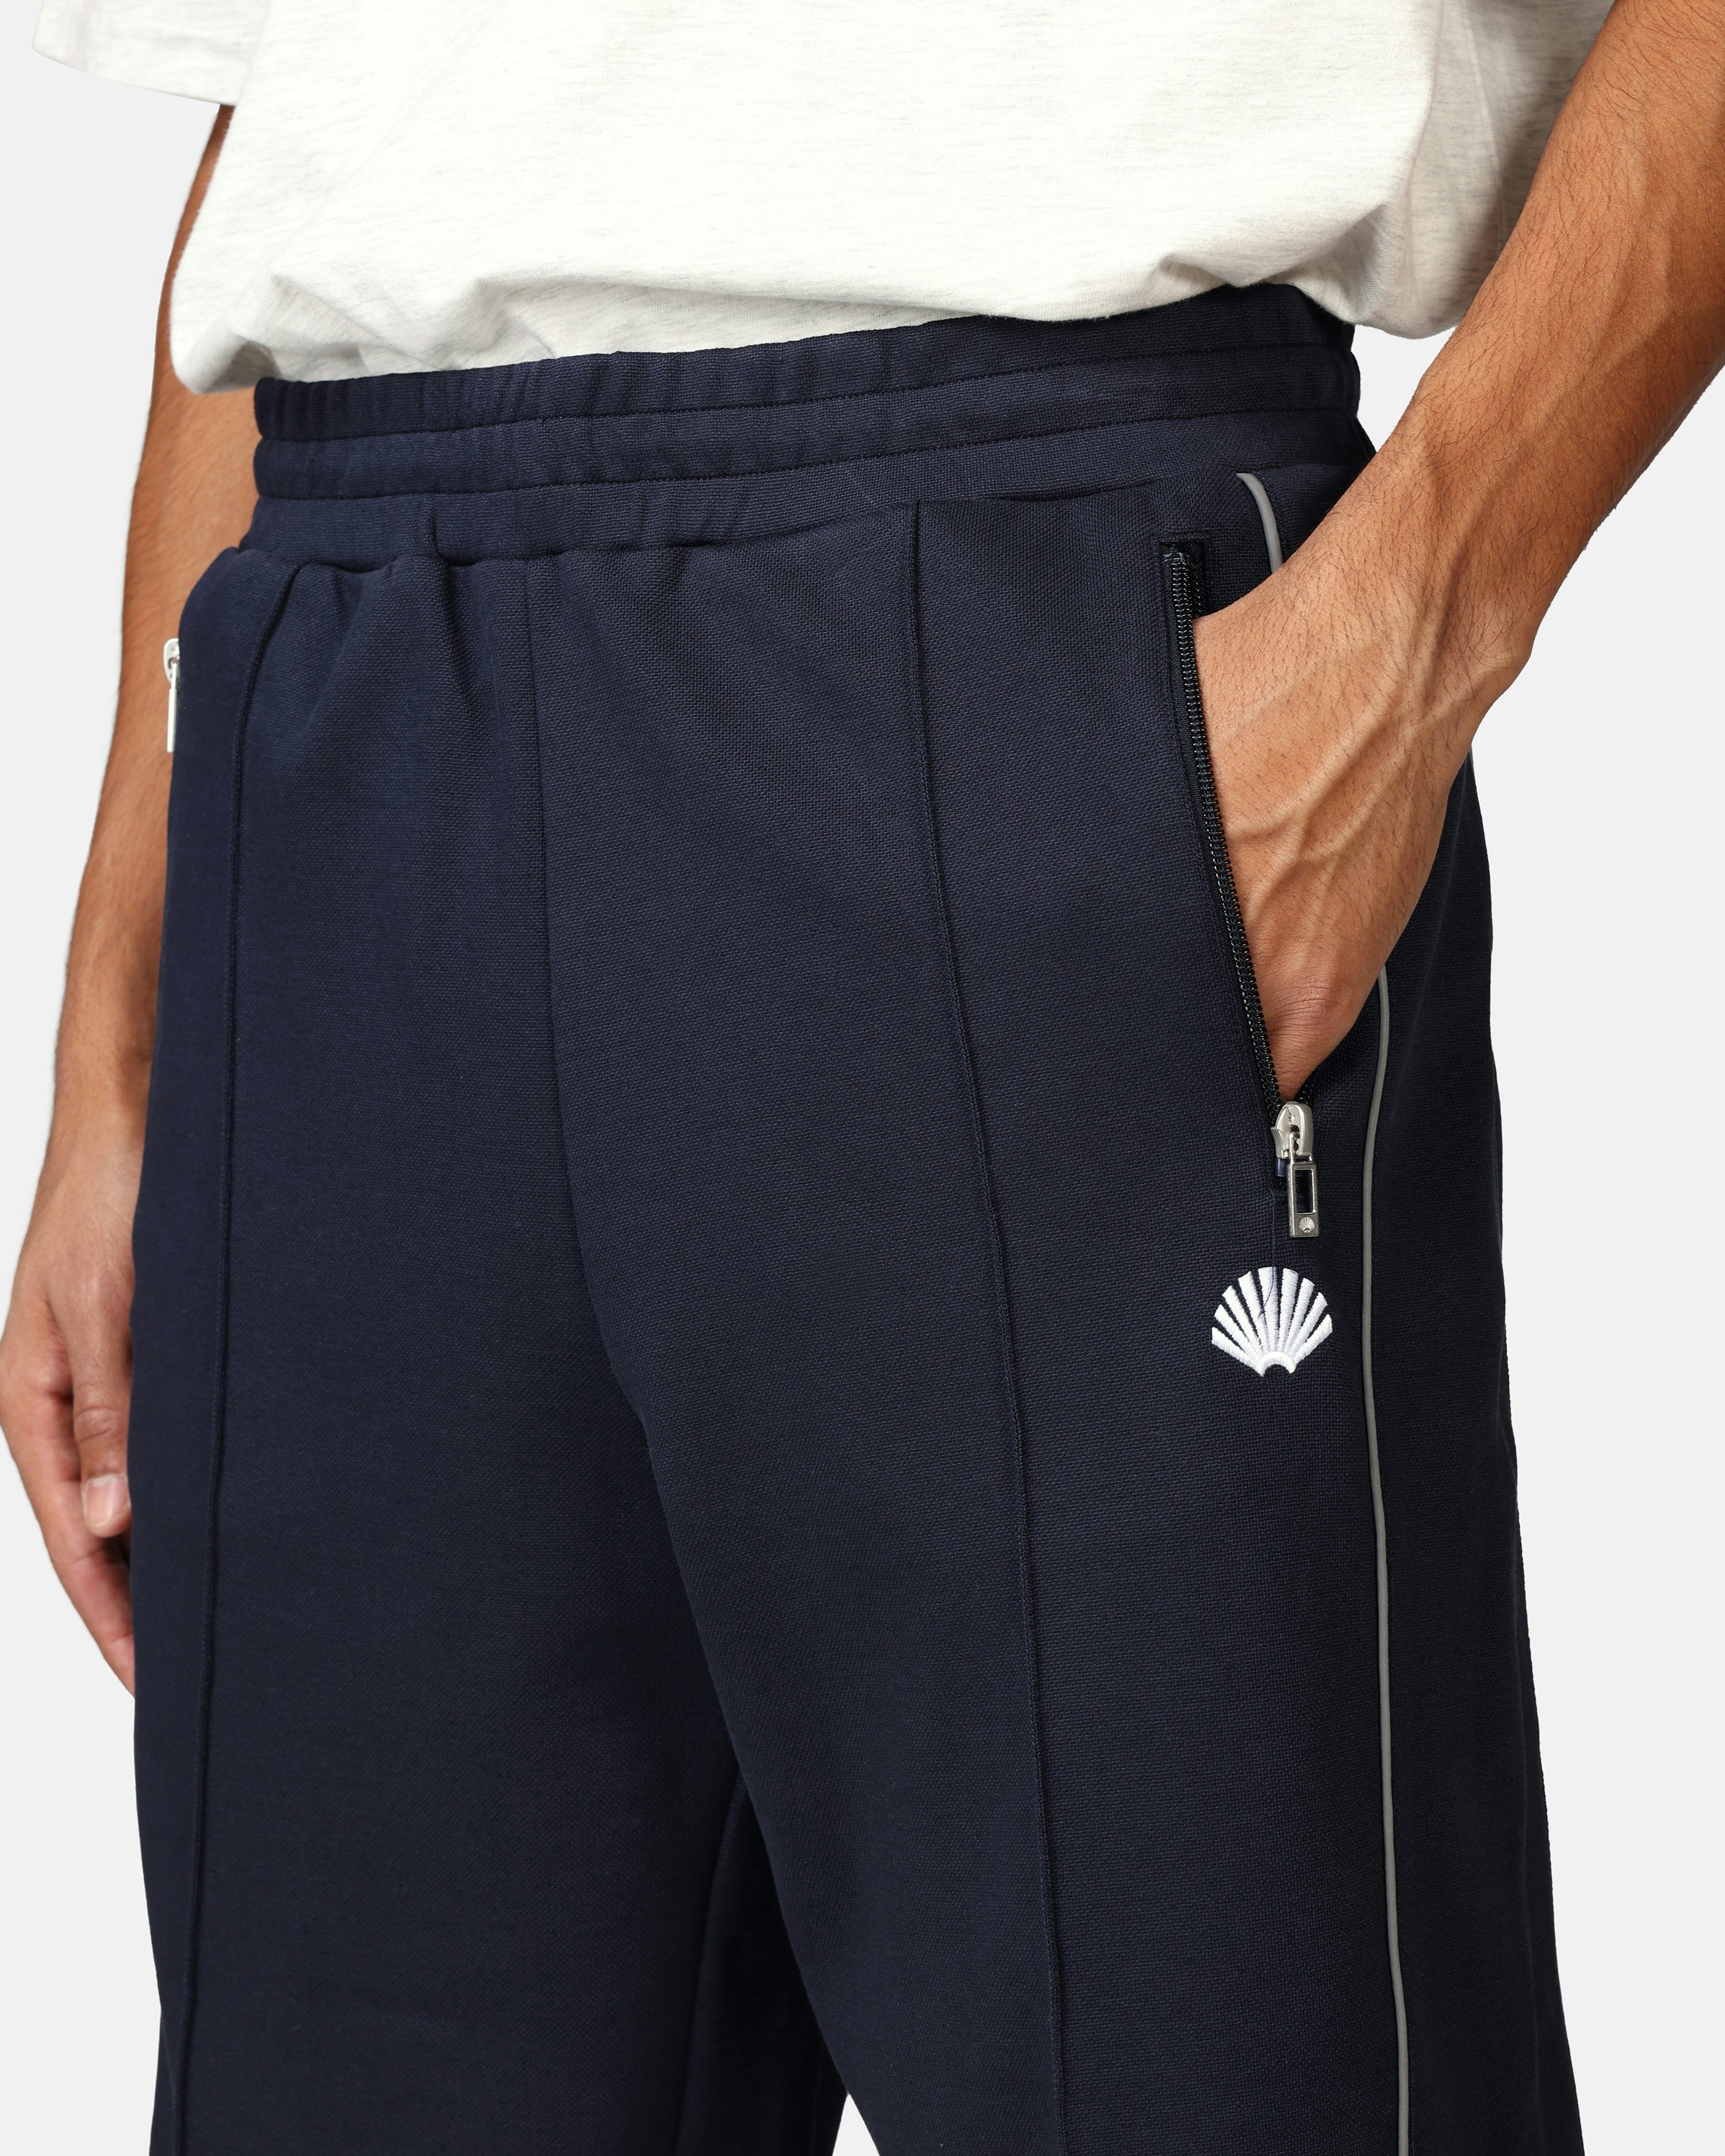 New Amsterdam Surf Association Track Pant - Couch Navy | Unisex